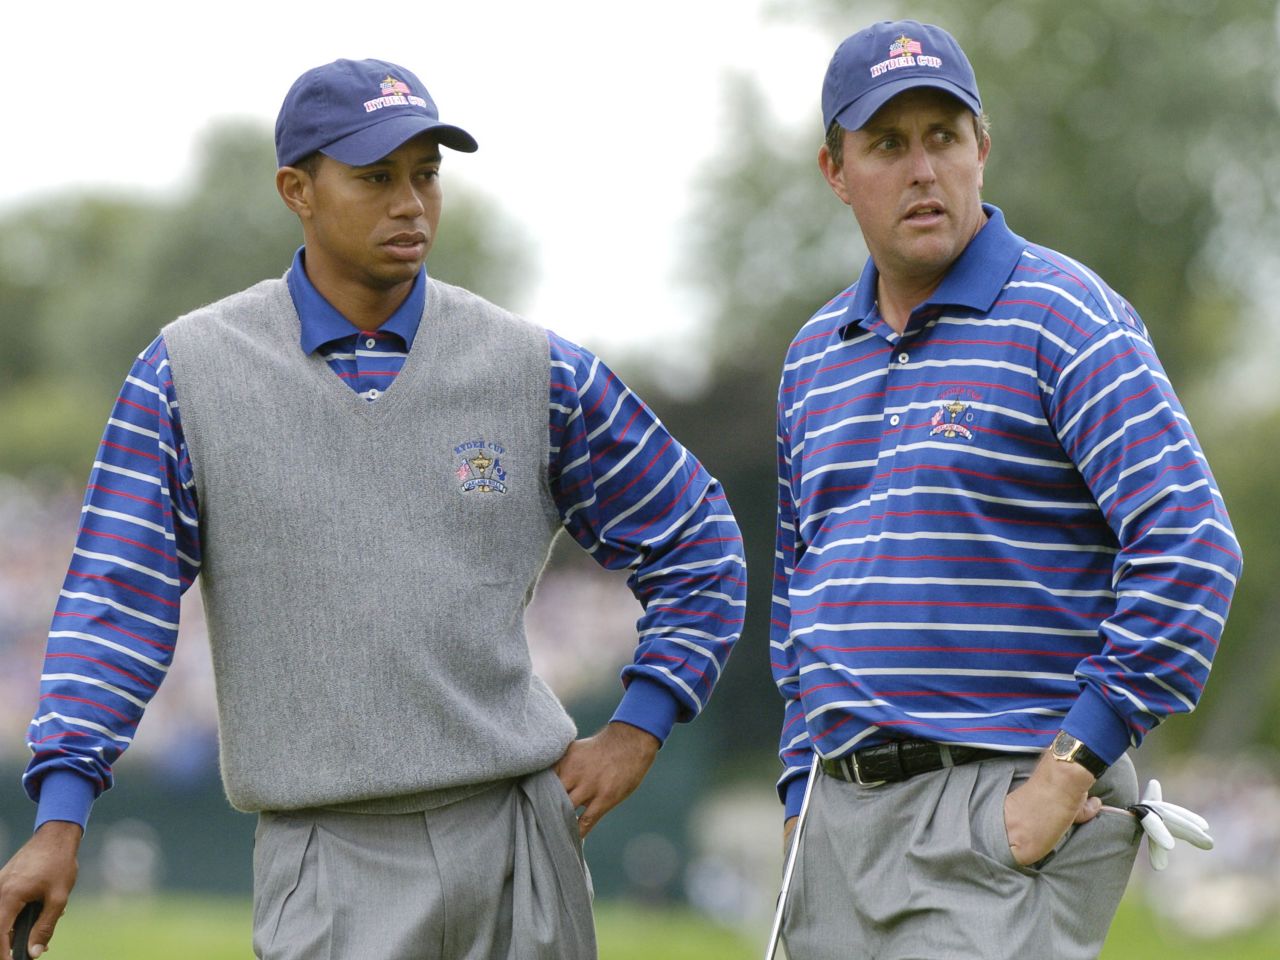 Tiger Woods and Phil Mickelson were paired together by U.S. Ryder Cup captain Hal Sutton in 2004 in a mistaken belief that the best players in the world would dominate their opponents. The duo lost both matches they played together in a partnership devoid of unity. 